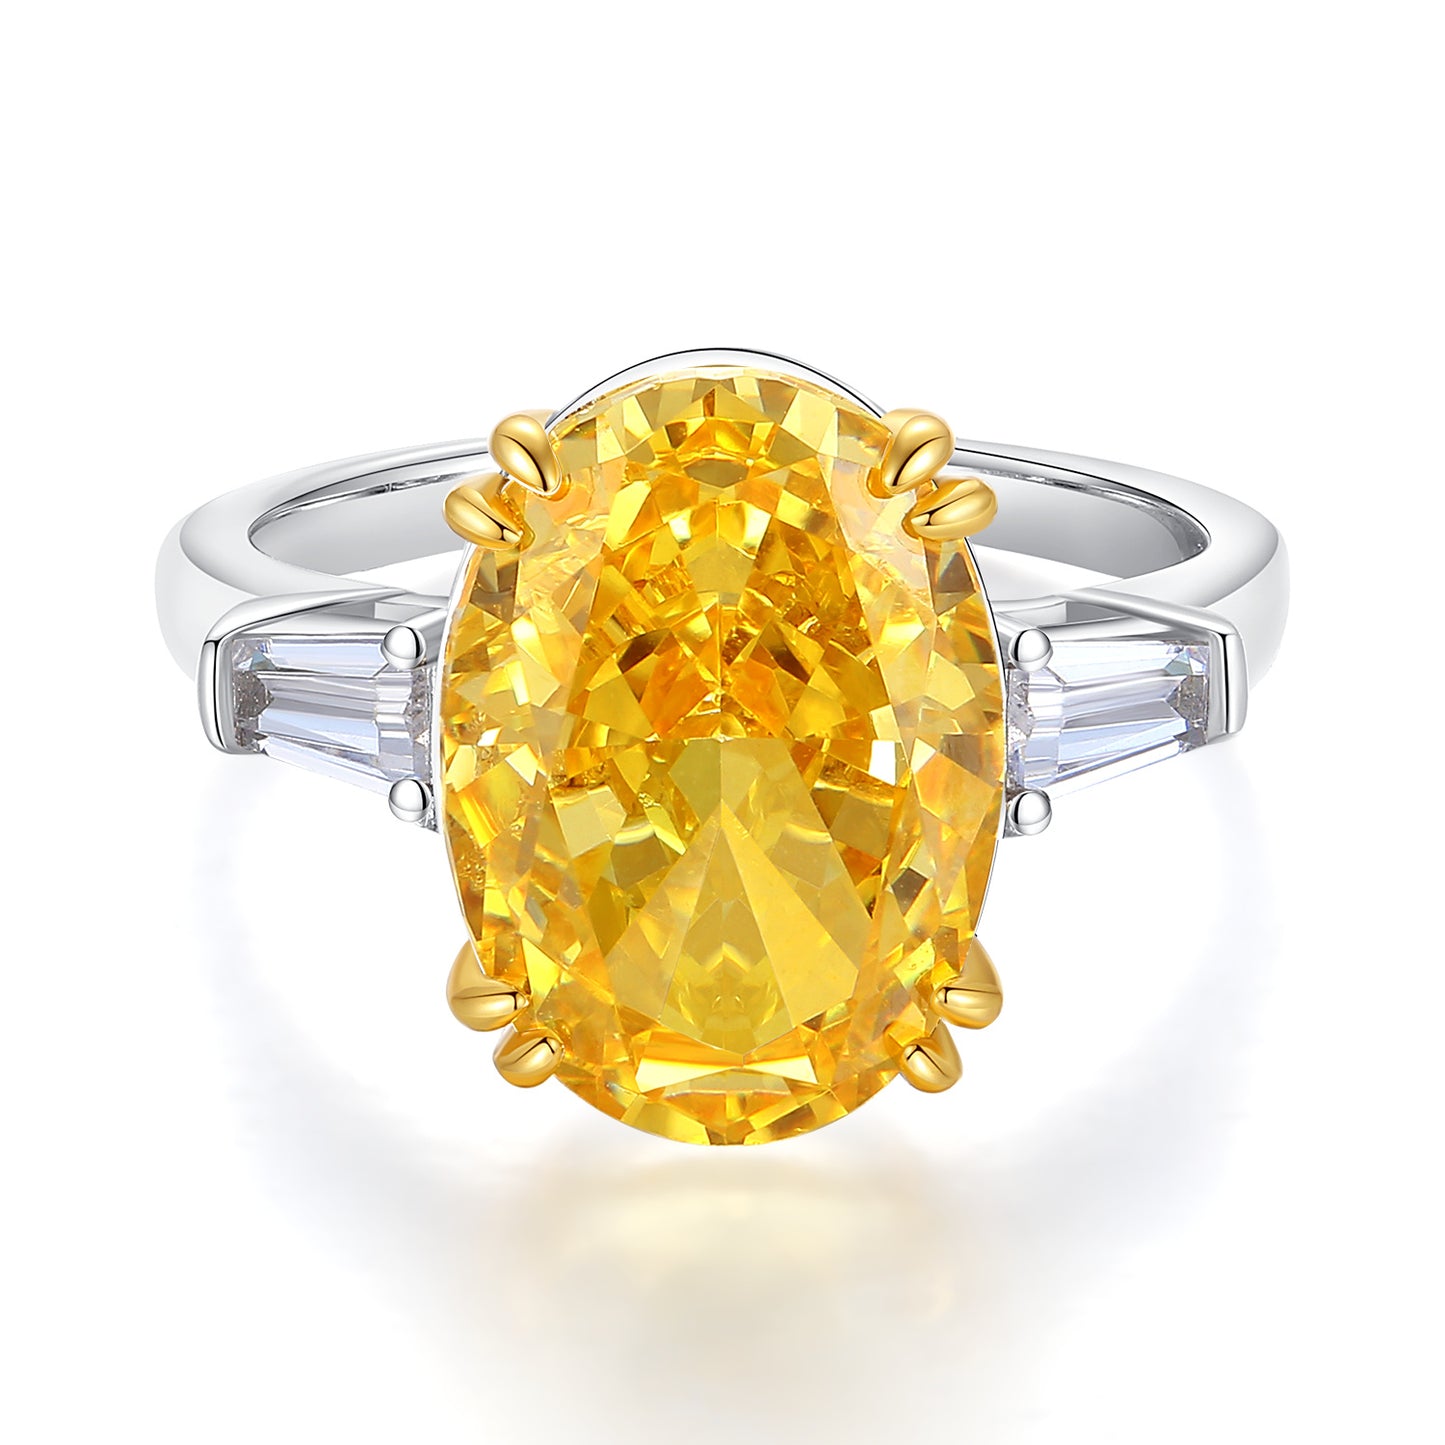 FairyLocus 10ct Fancy Yellow Halo Oval Solitaire Sterling Silver Ring FLCYBSRG09 FairyLocus